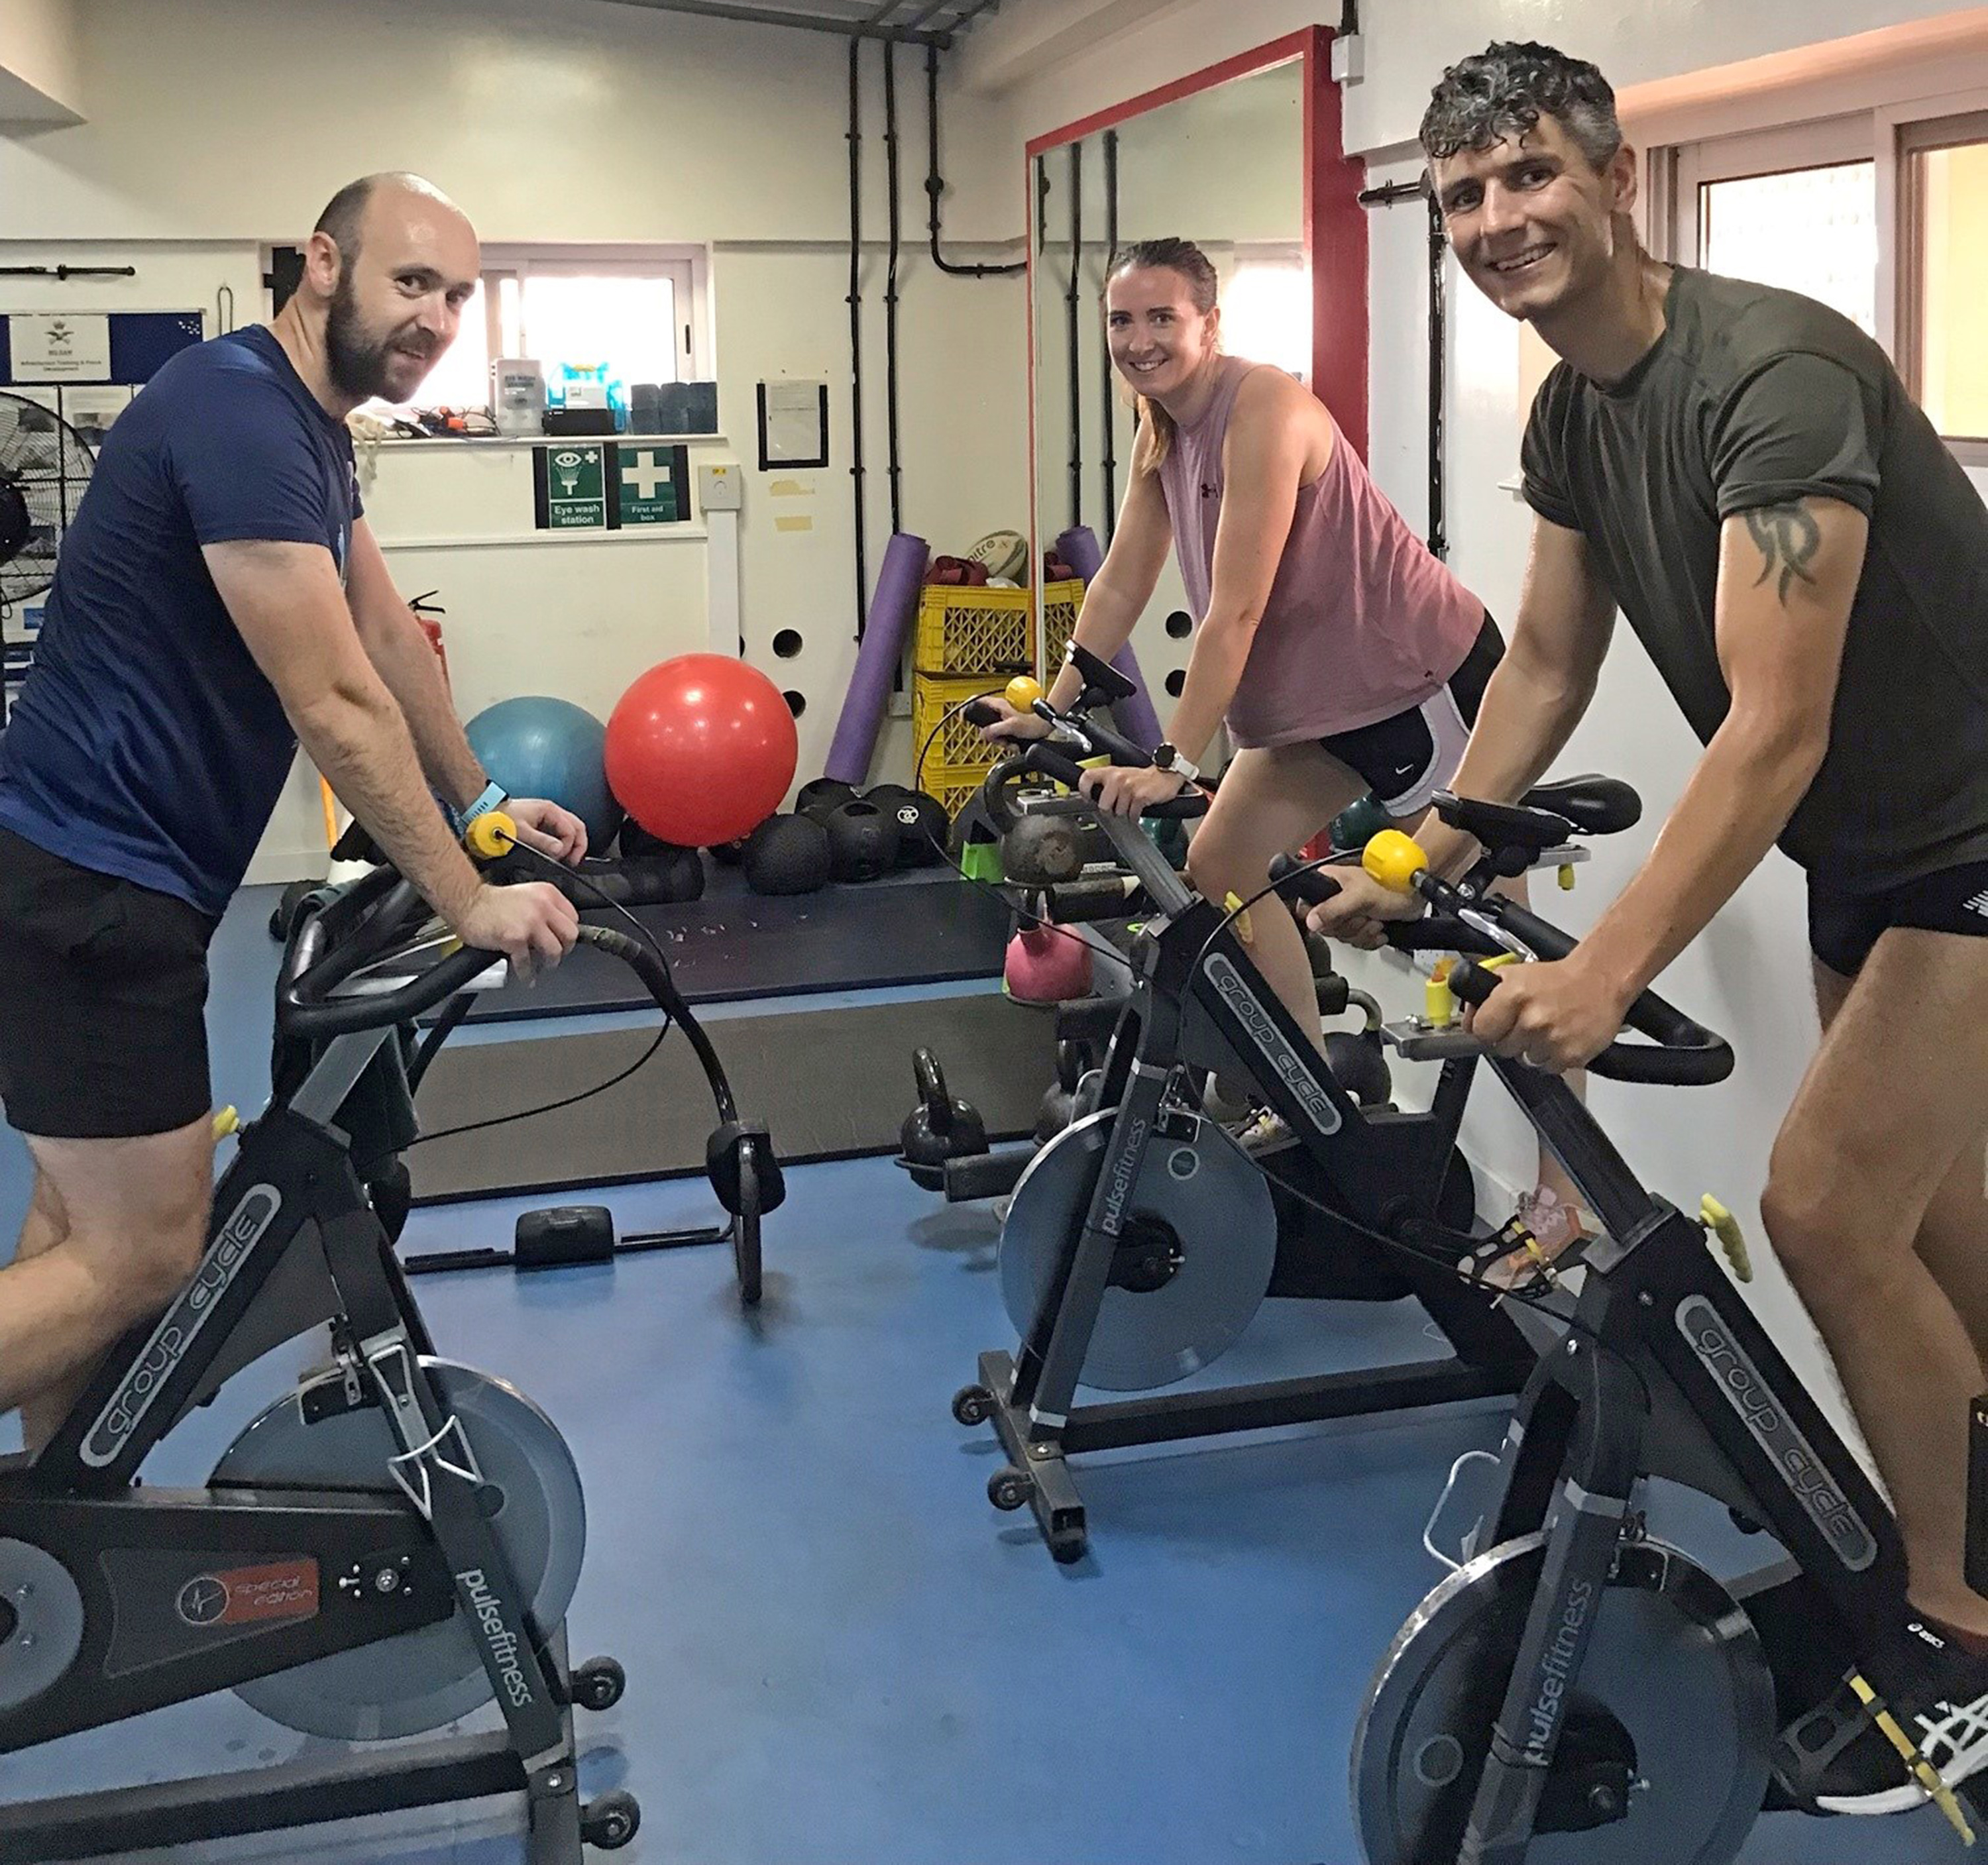 Image shows aviators in the gym on stationary bikes.